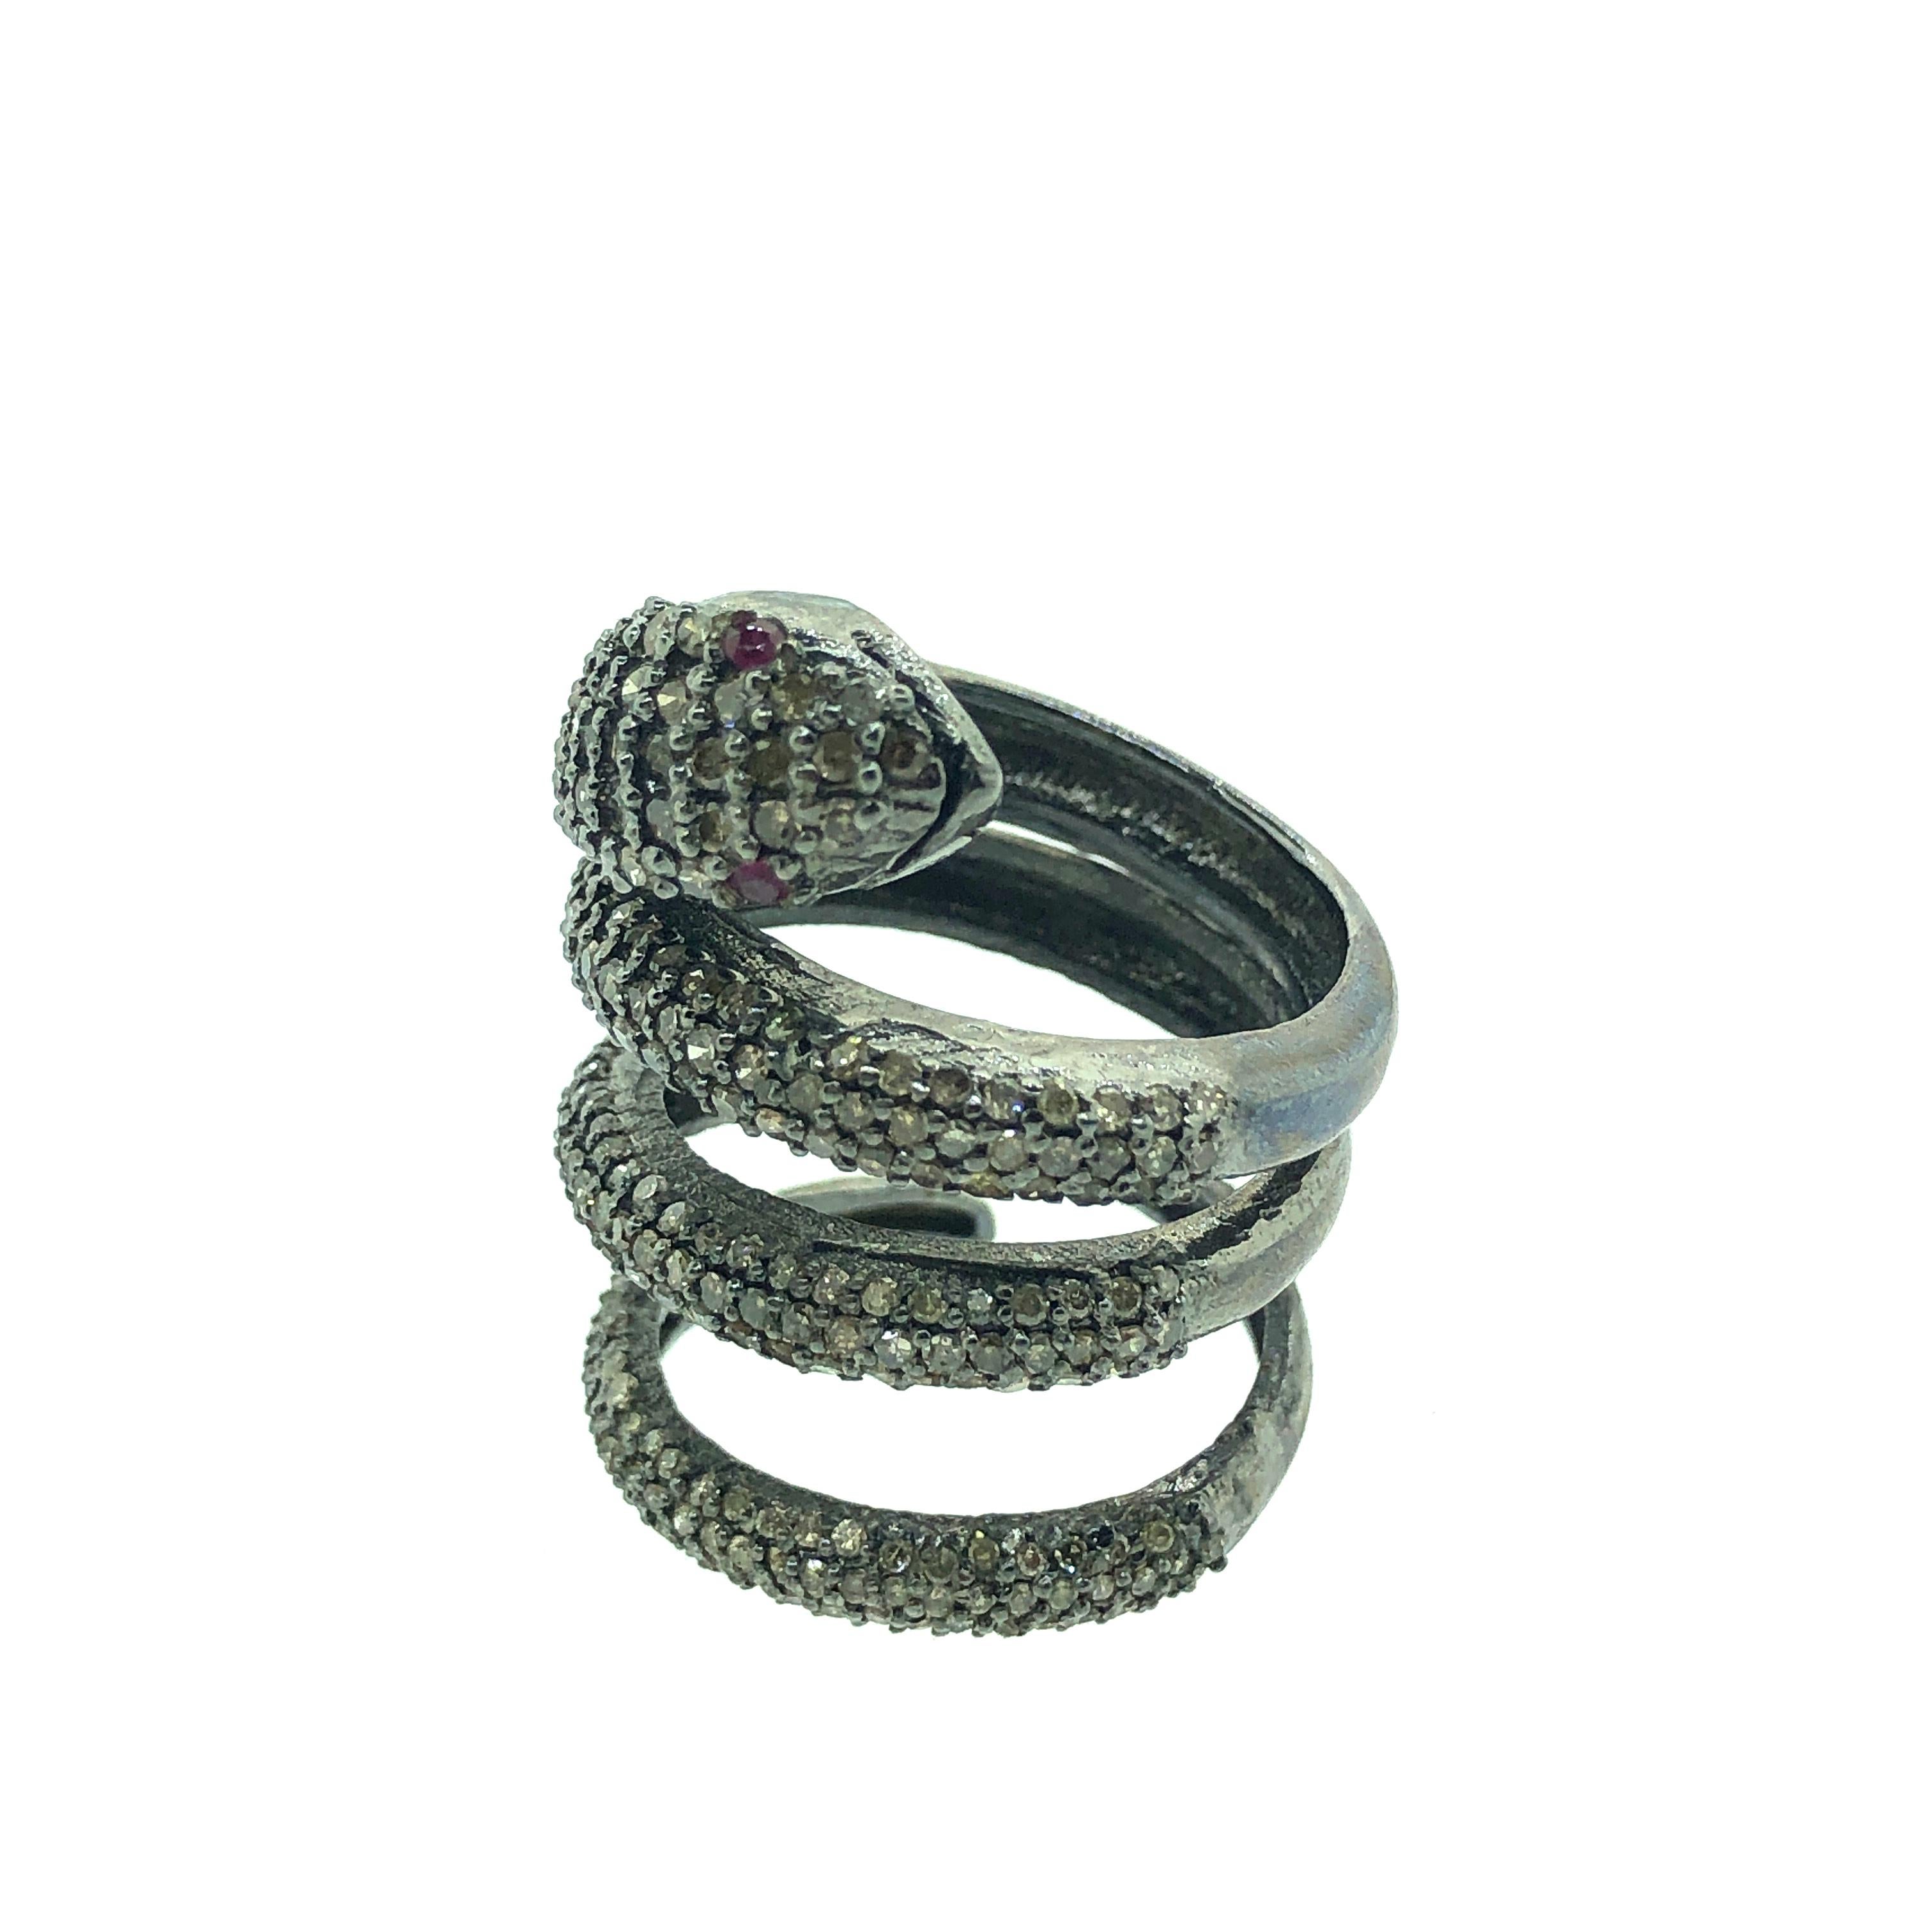 7.75 Size 2.88 ct Champagne Diamond and 0.04 ct Ruby Eyes Snake Ring set in Oxidized Sterling Silver. All the diamonds are pave diamonds with ruby eyes in the snake. A perfect cocktail ring for a person who loves snakes. 
Diamonds : 2.88 ct
Ruby :